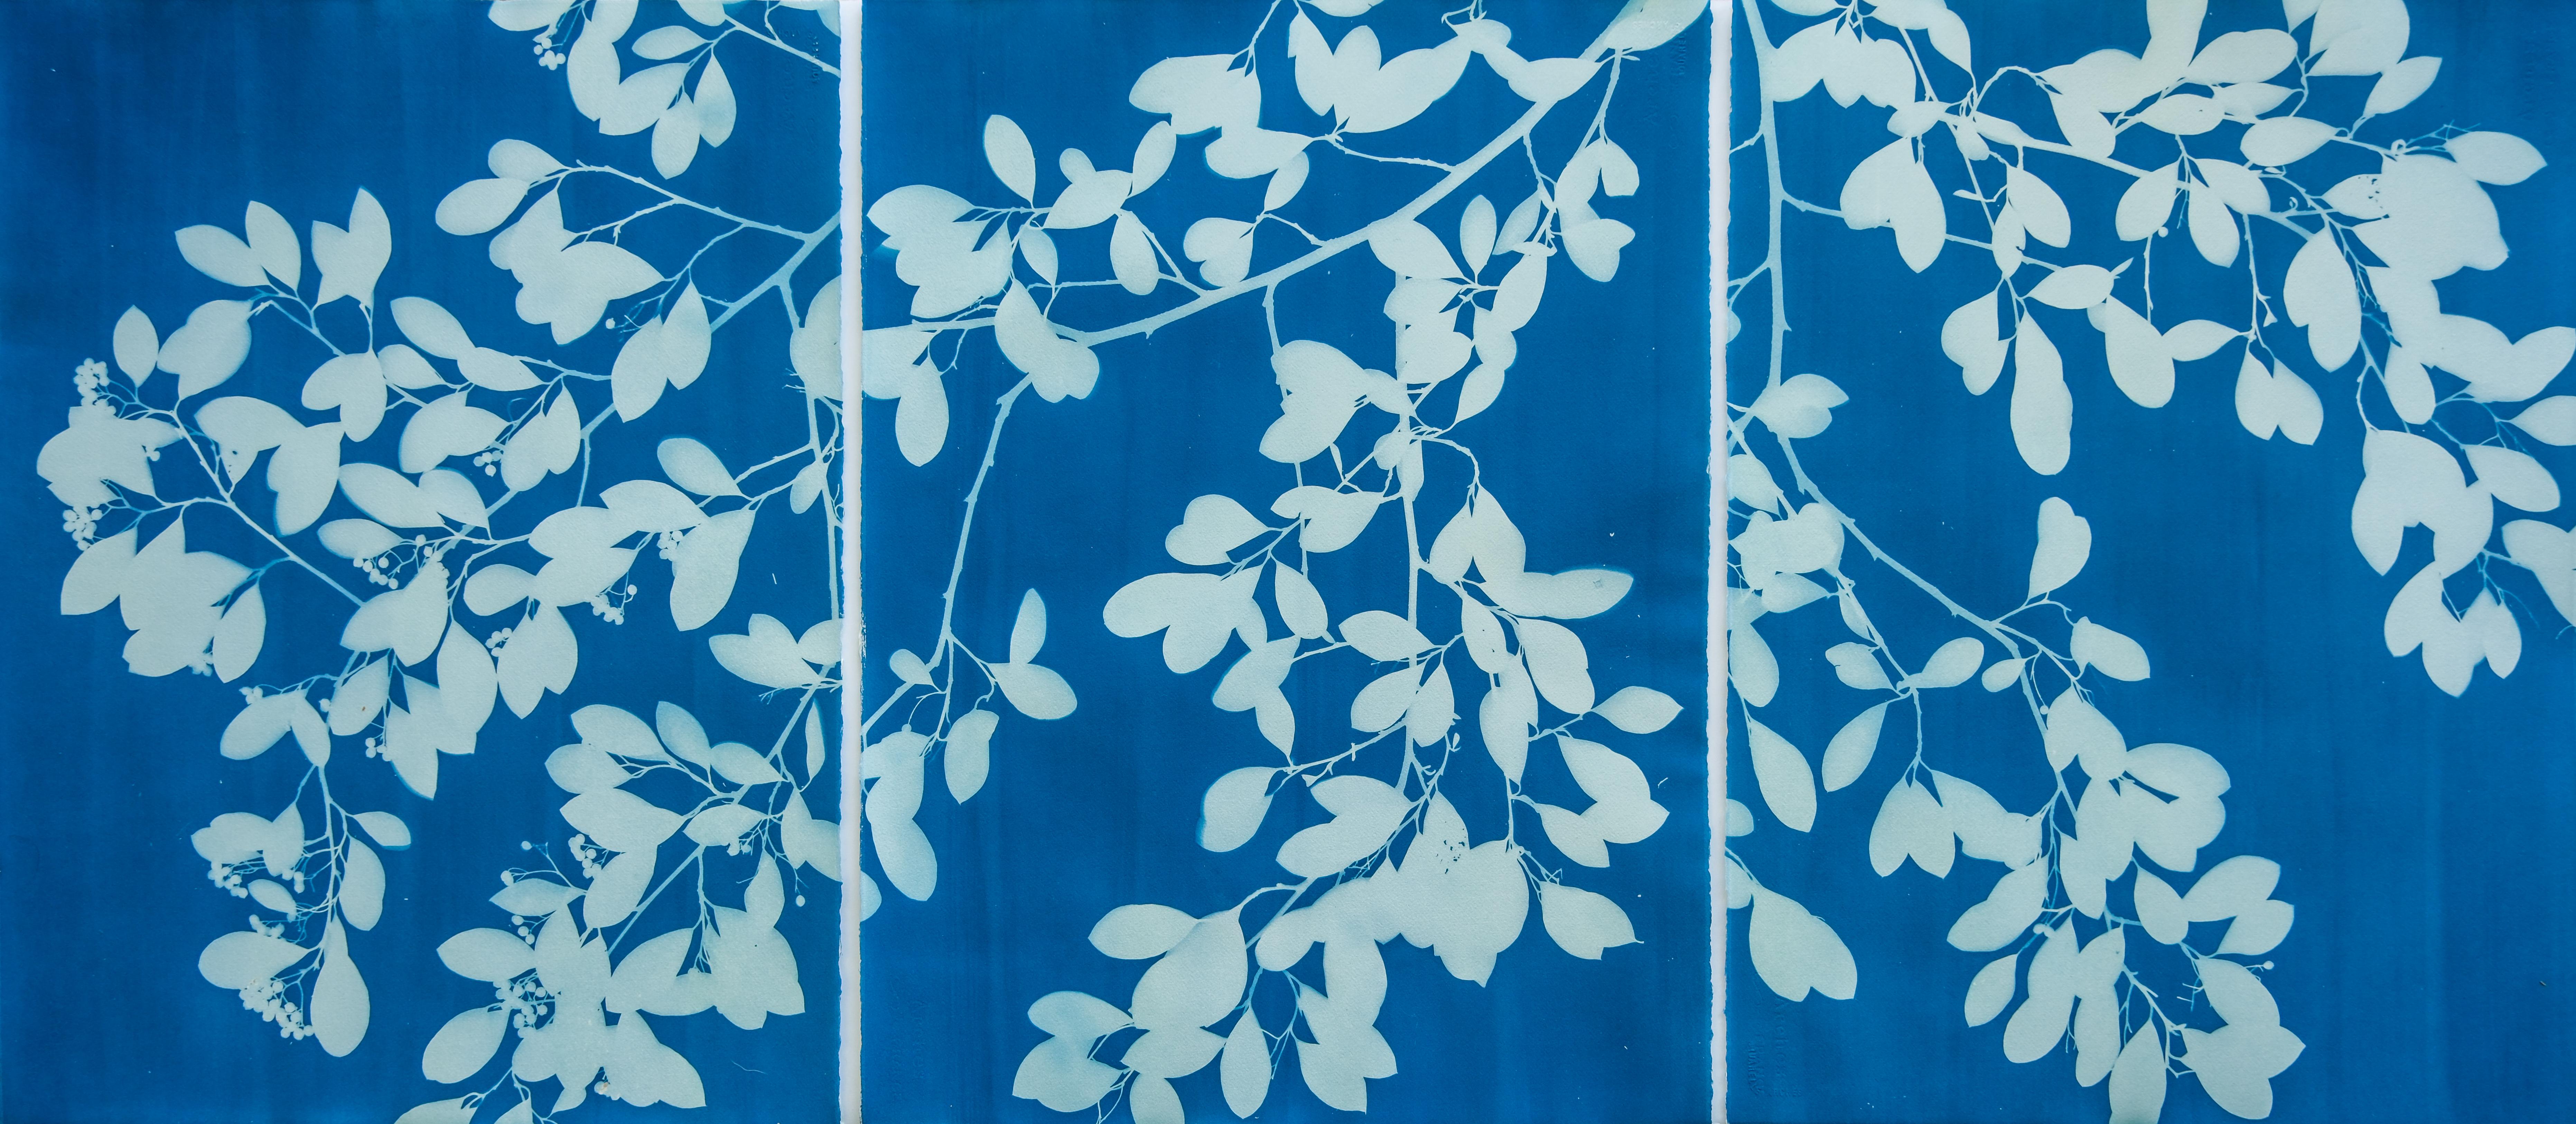 Christine So Still-Life Photograph - Spring Night Triptych (3 hand-printed botanical cyanotypes, 30 x 22 in. each)